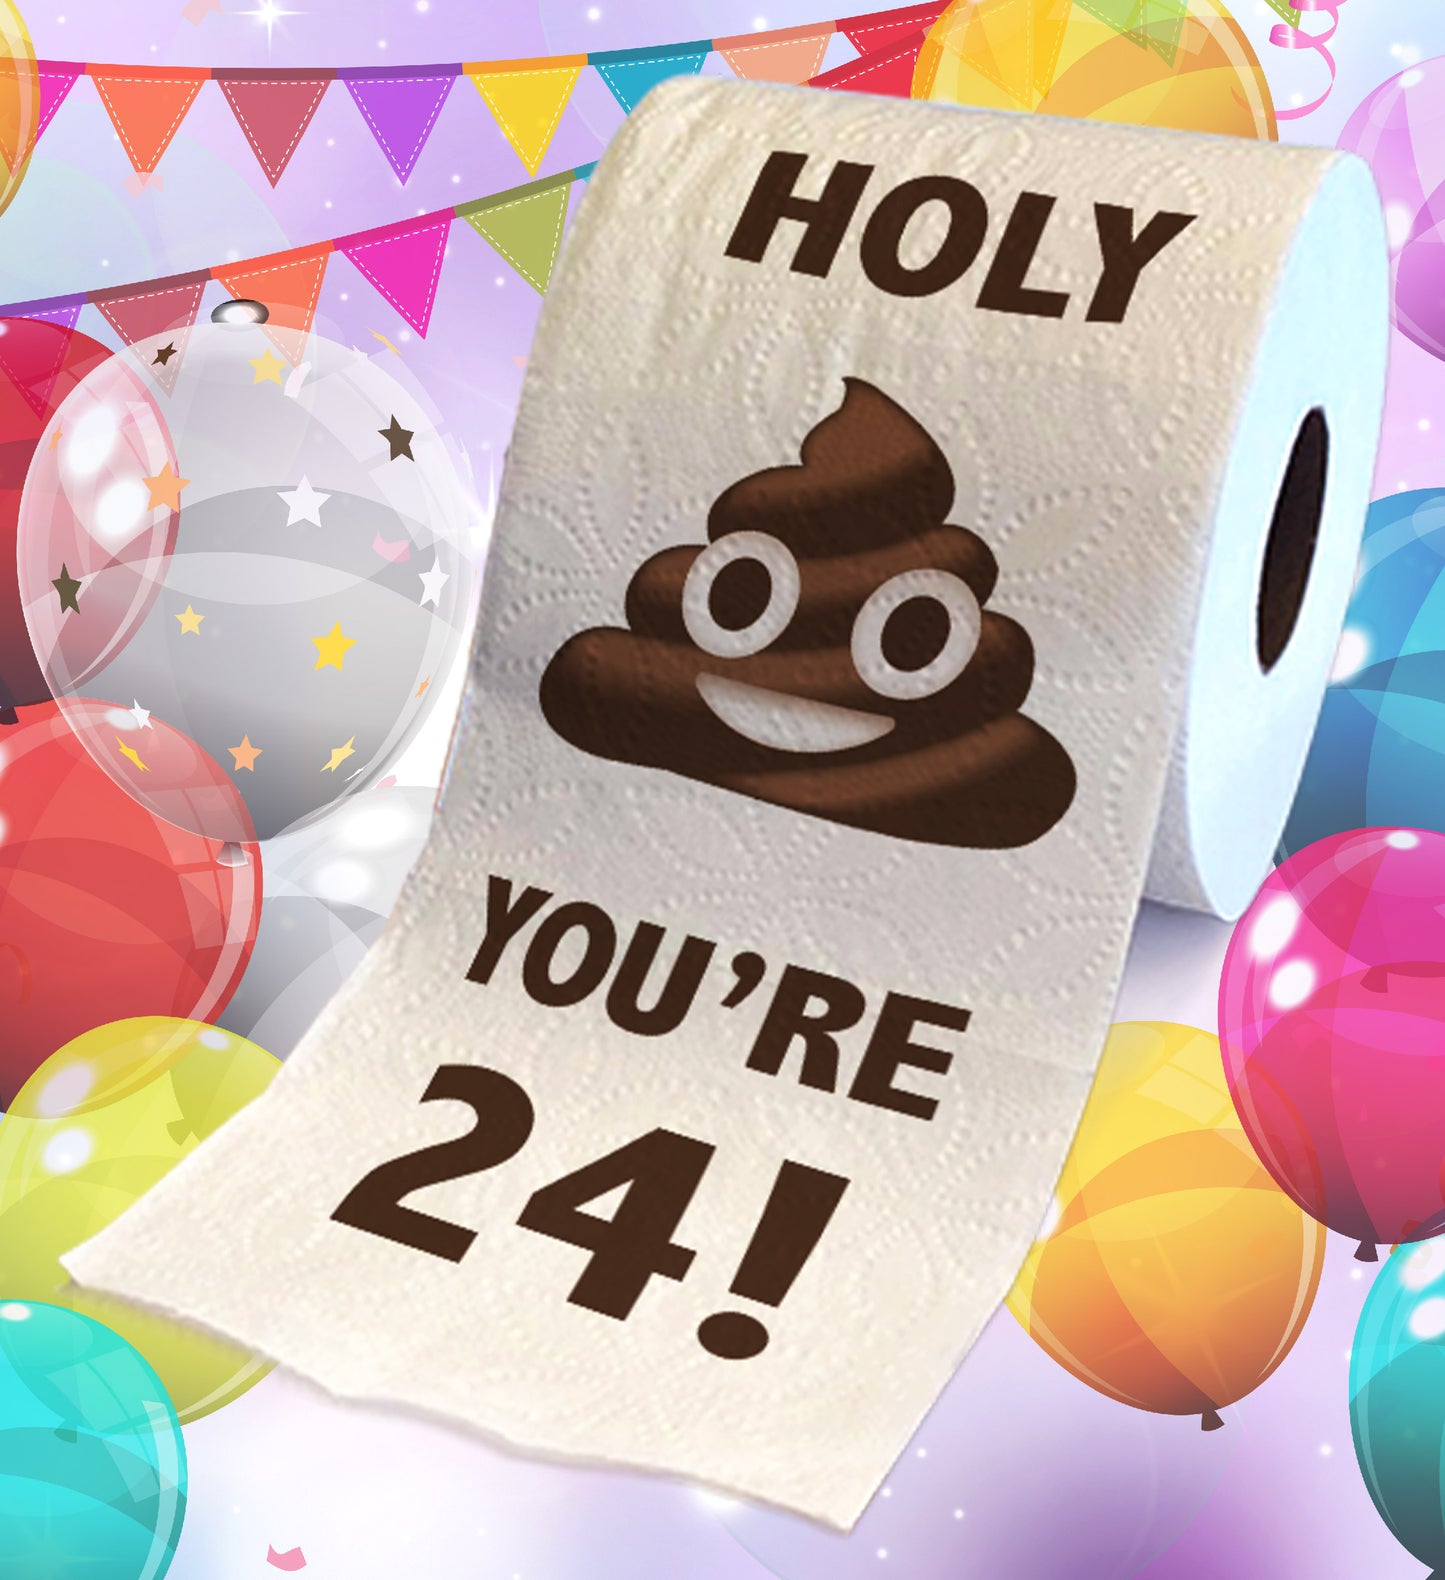 Printed TP Holy Poop You're 24 Printed Toilet Paper Funny Gag Gift – 500 Sheets